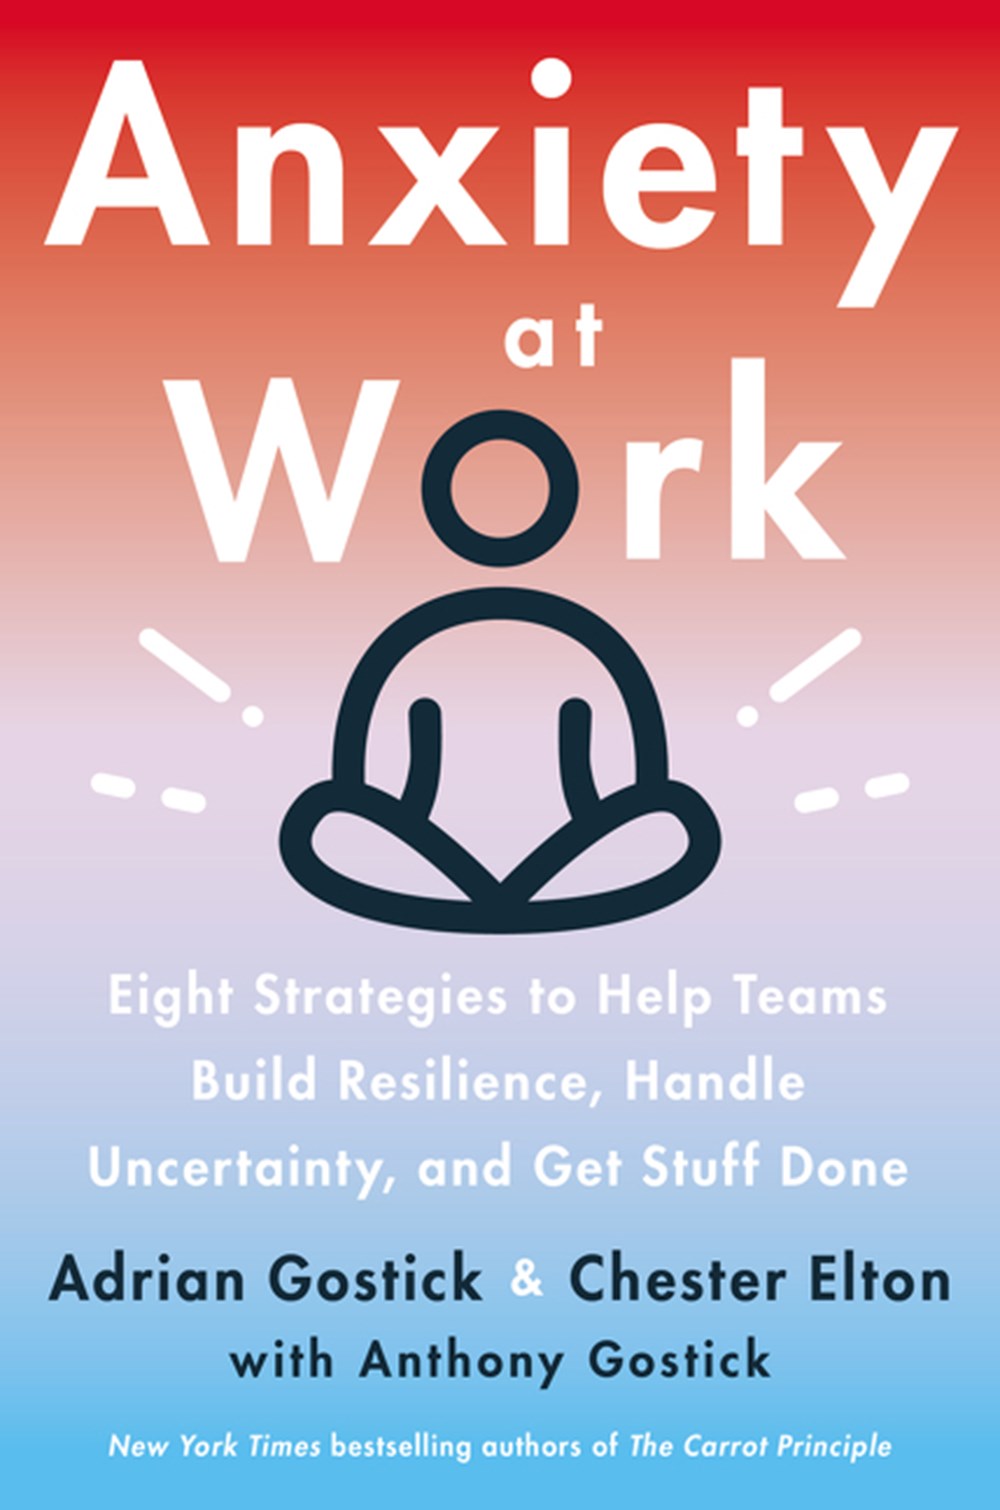 Anxiety at Work 8 Strategies to Help Teams Build Resilience, Handle Uncertainty, and Get Stuff Done